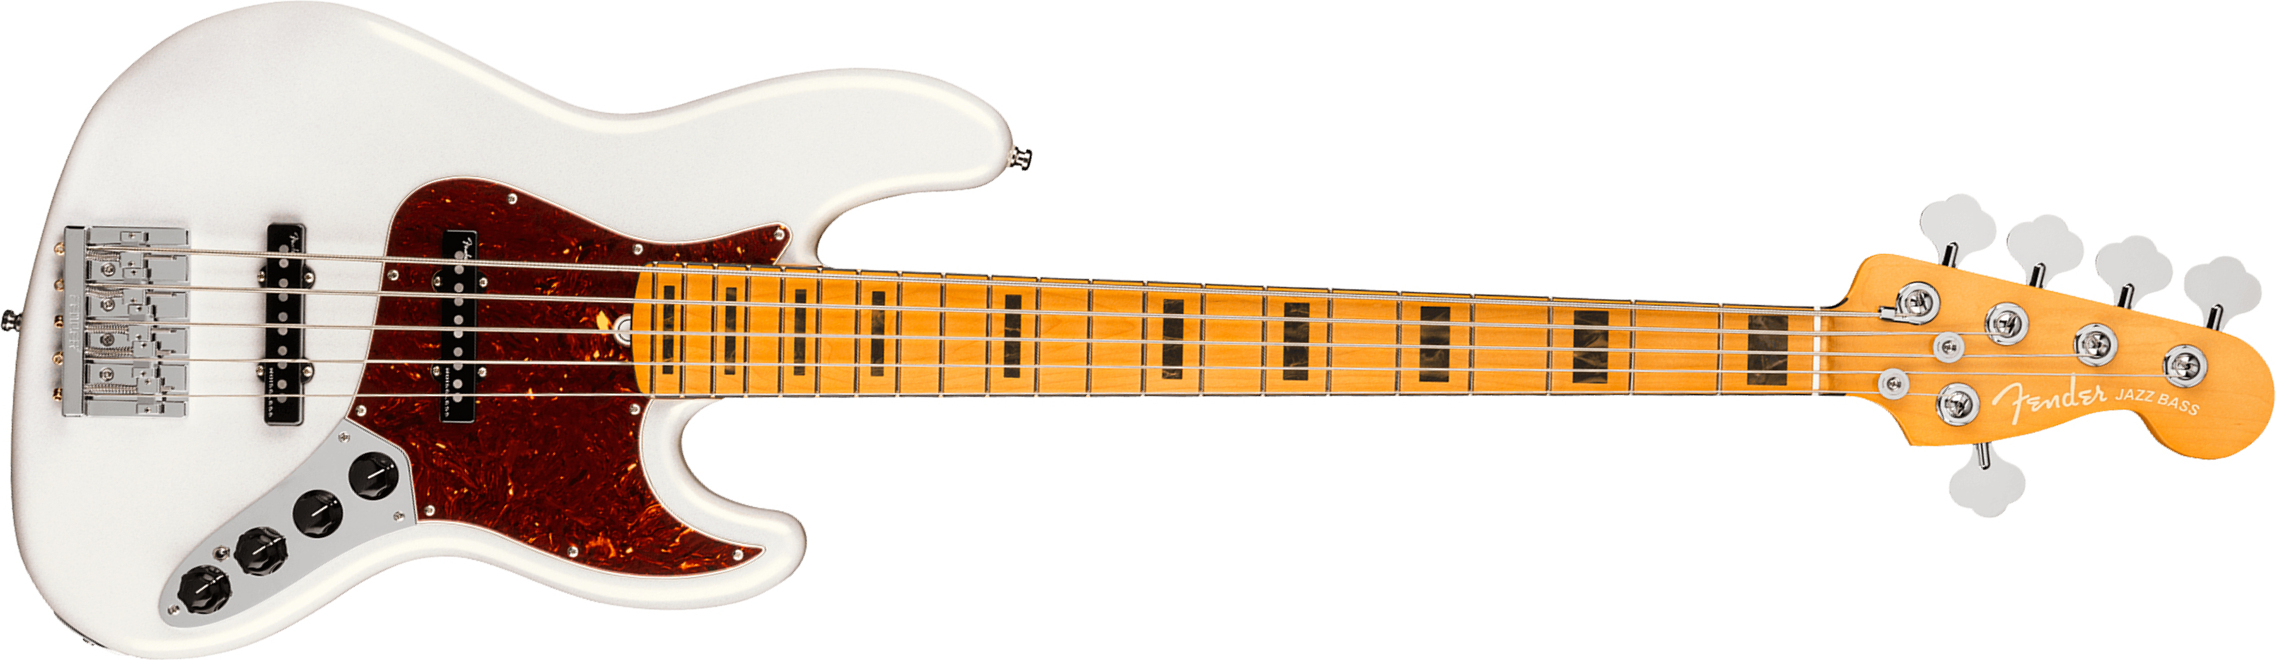 Fender Jazz Bass V American Ultra 2019 Usa 5-cordes Mn - Arctic Pearl - Solid body elektrische bas - Main picture